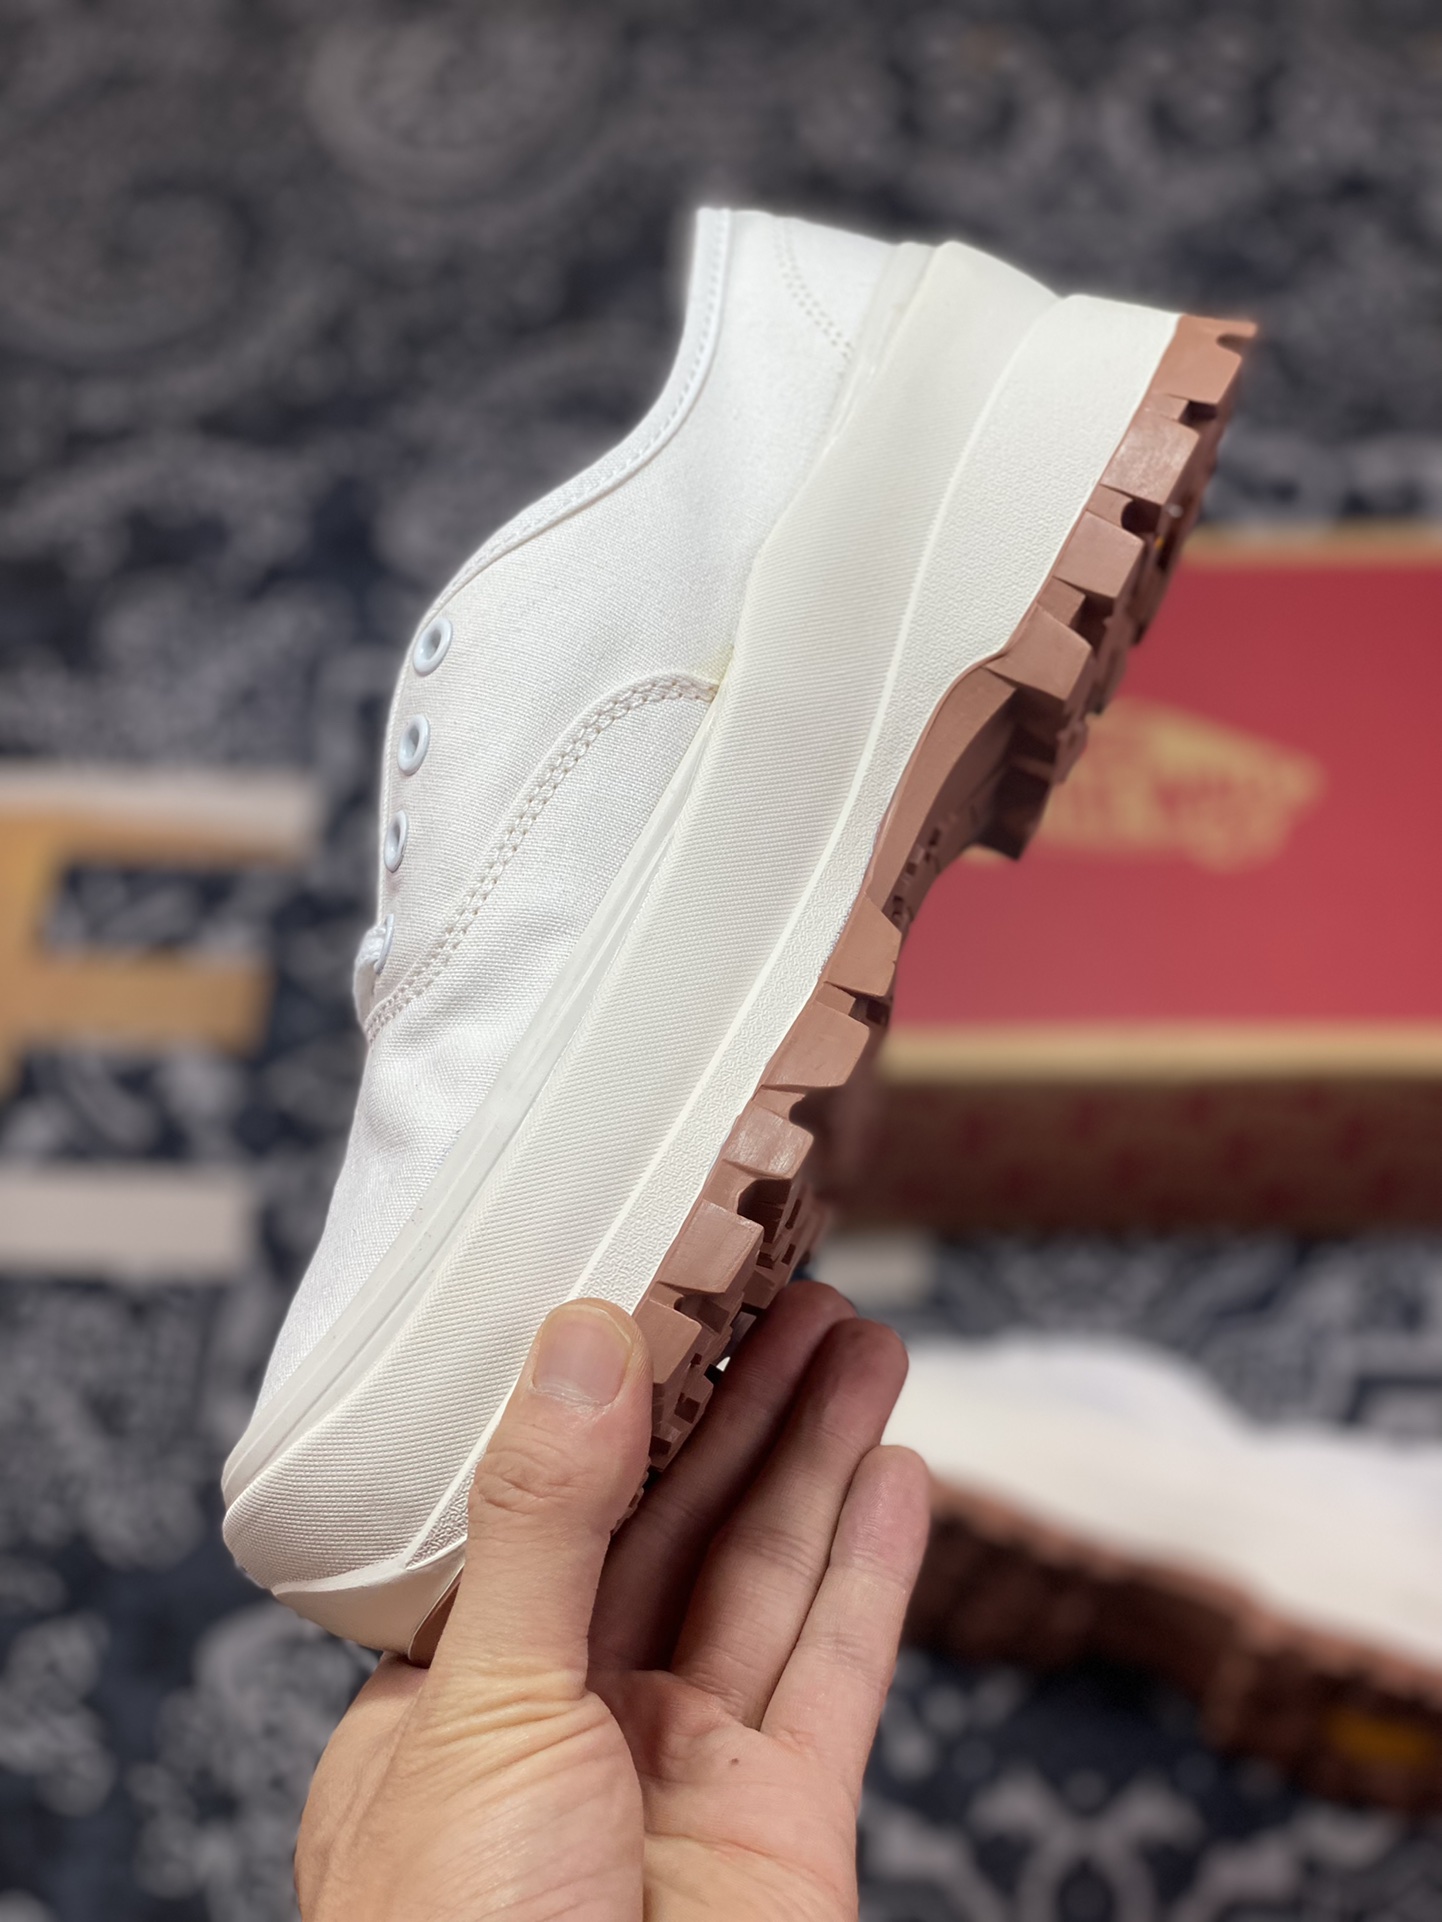 Vans’ instant height-increasing platform shoes are here. Vans Authentic Vibram DX collaboration Anaheim comfortable height-increasing canvas shoes